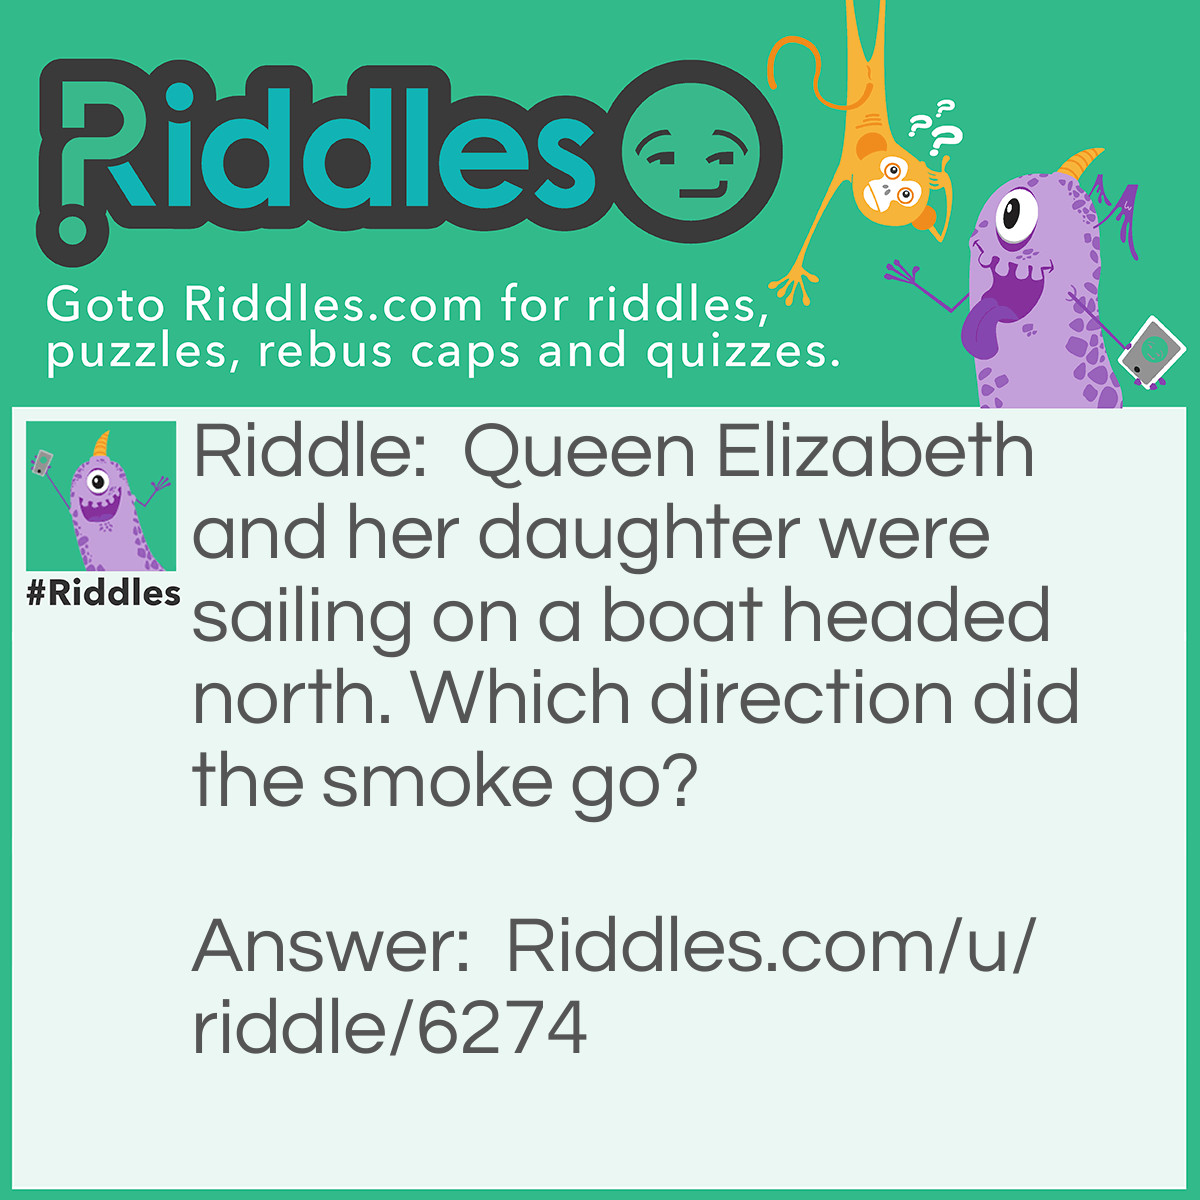 Riddle: Queen Elizabeth and her daughter were sailing on a boat headed north. Which direction did the smoke go? Answer: A sailing boat has no smoke.